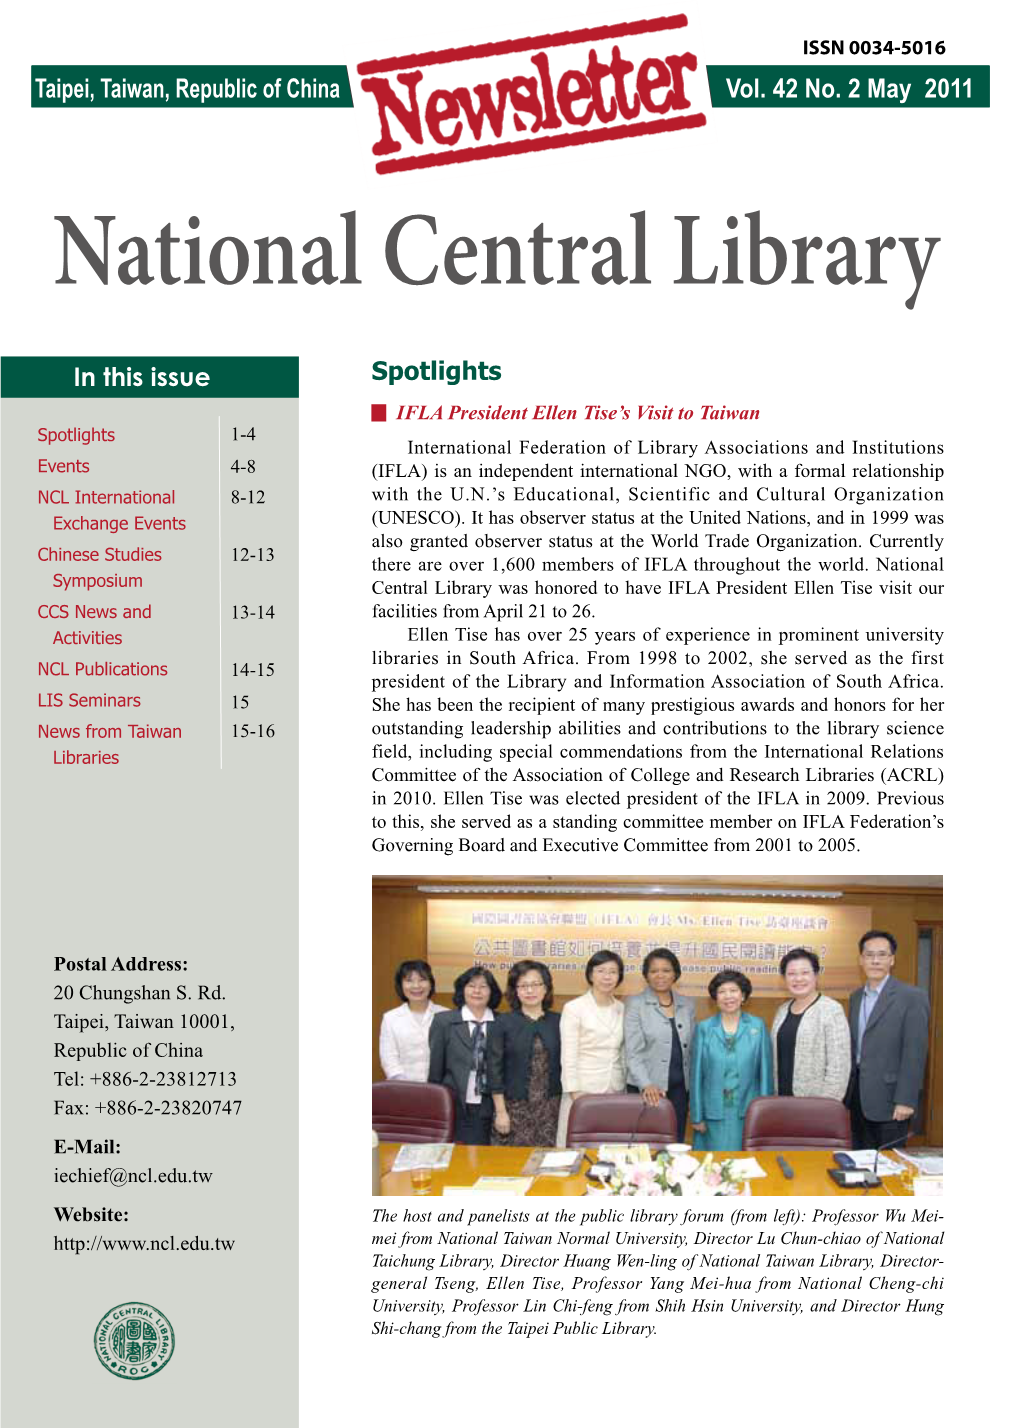 National Central Library